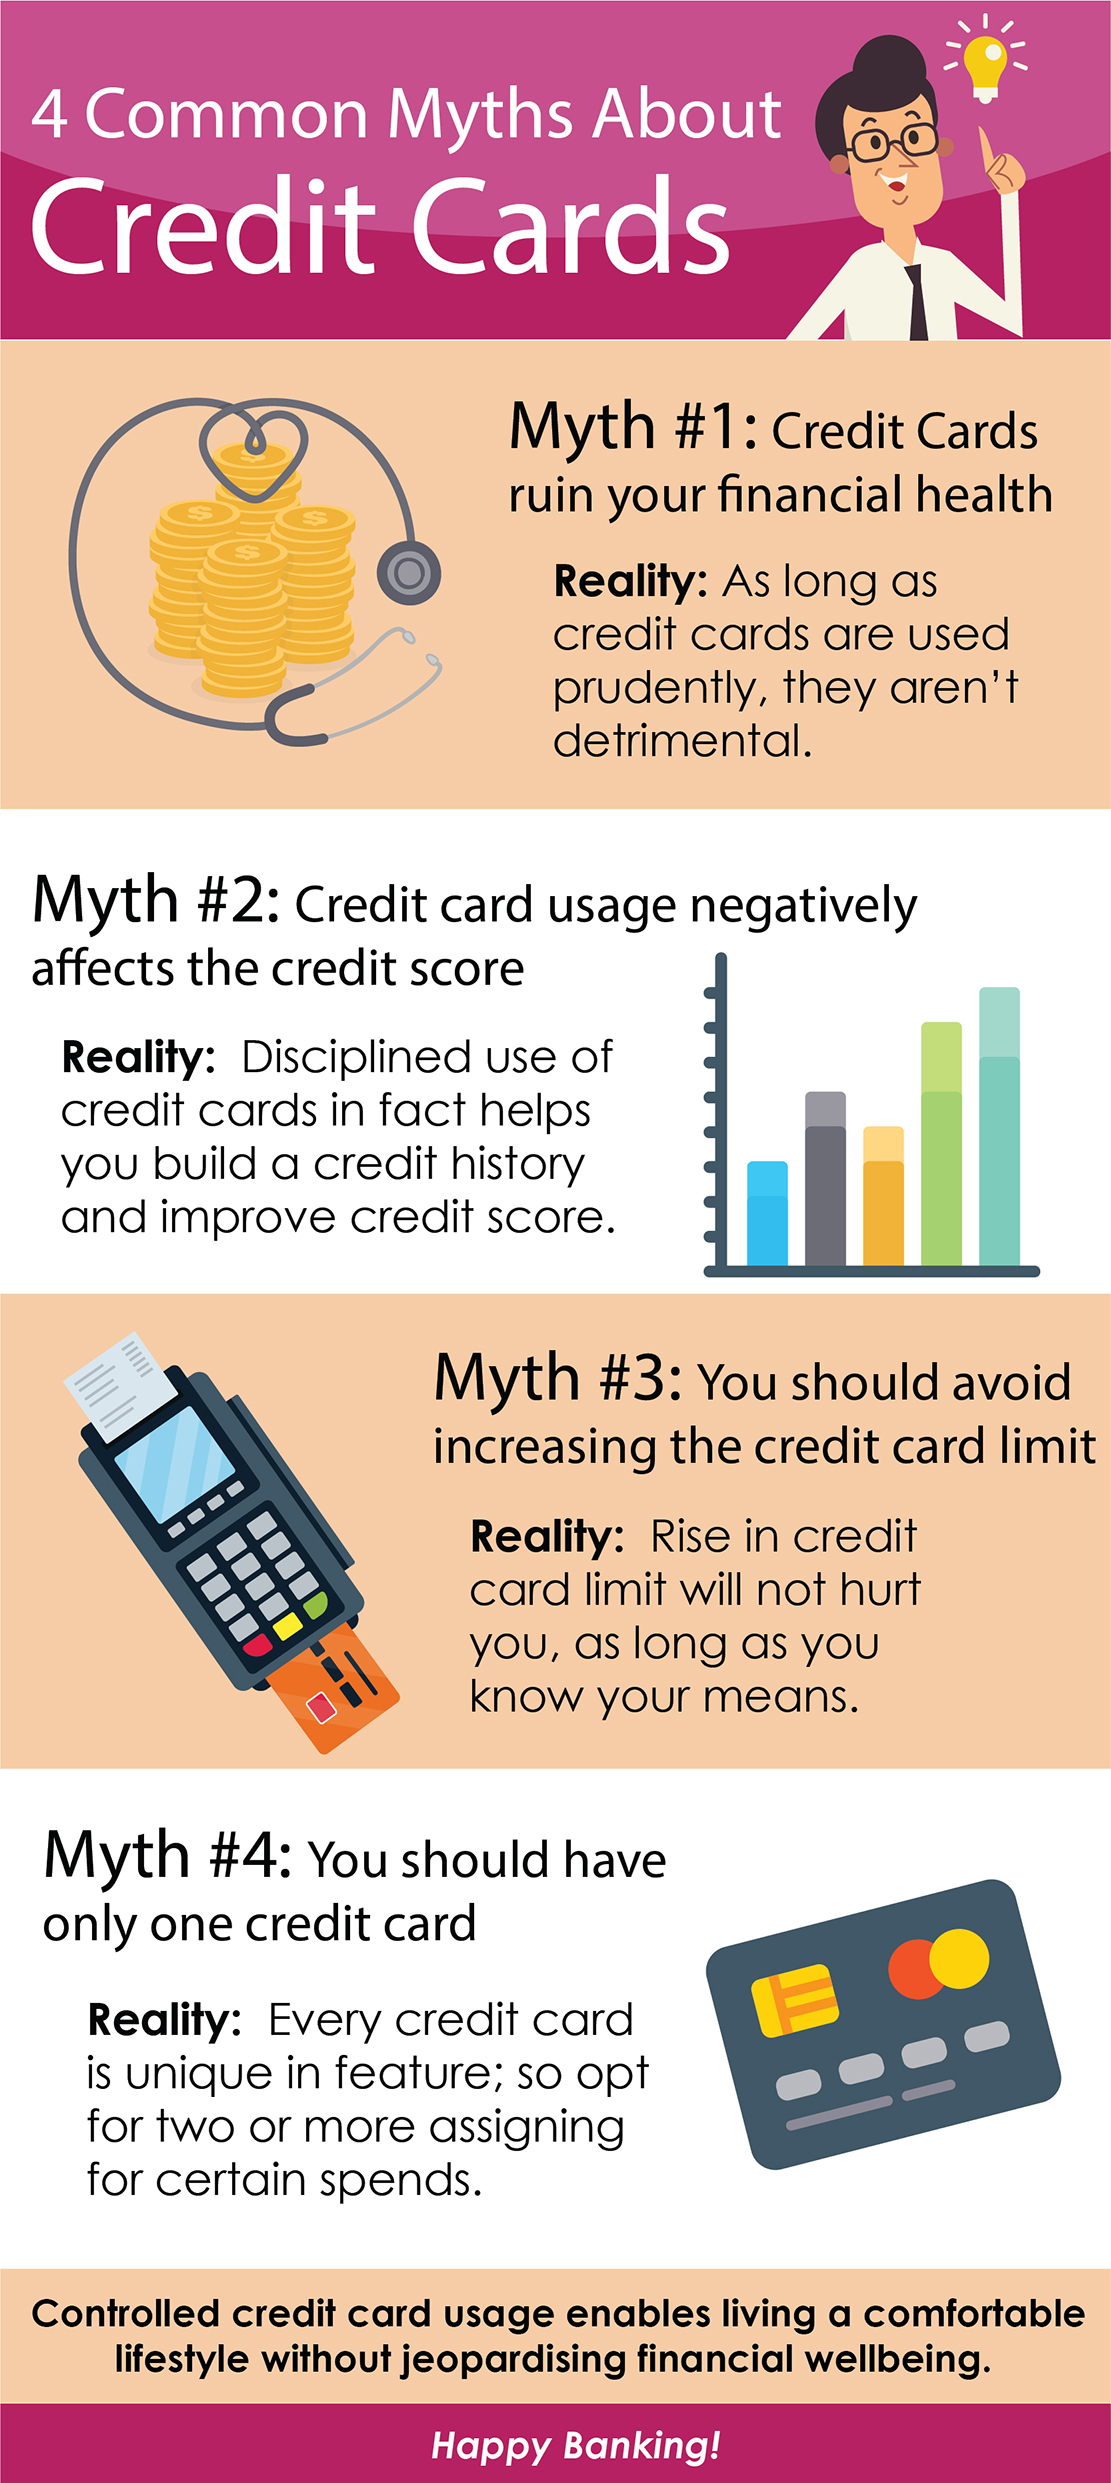 4 Common Myths About Credit Cards